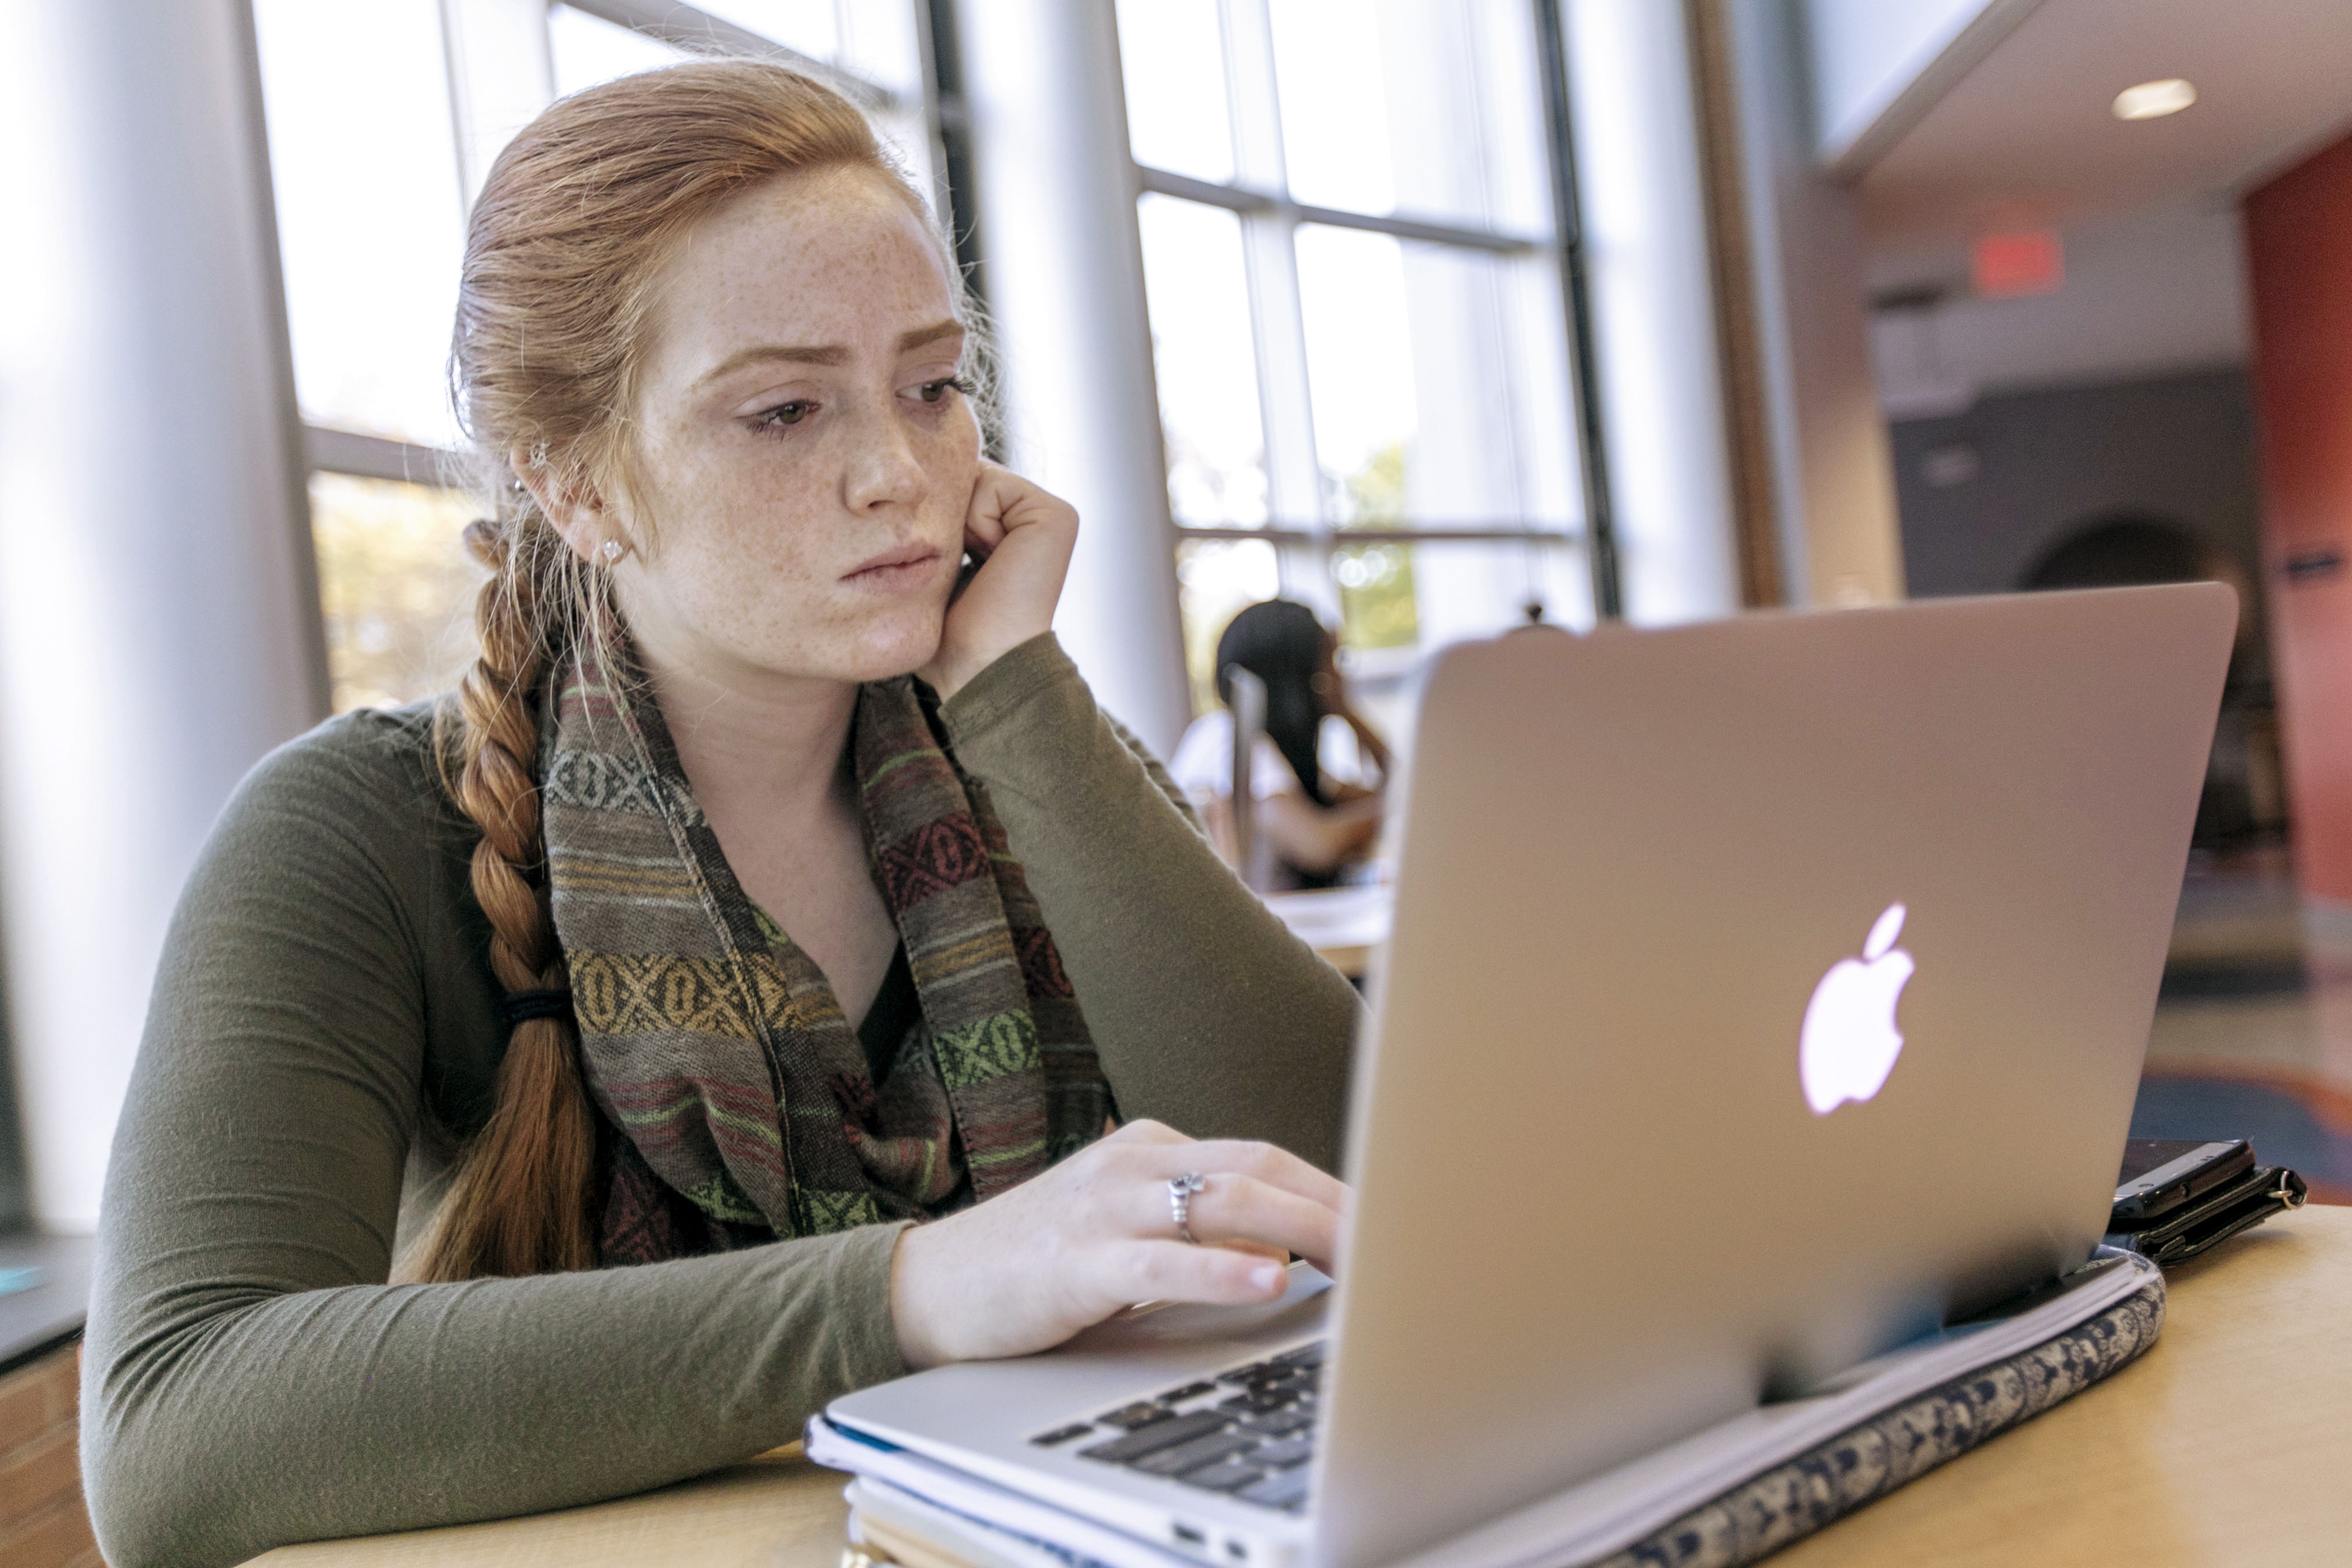 Young woman on a laptop